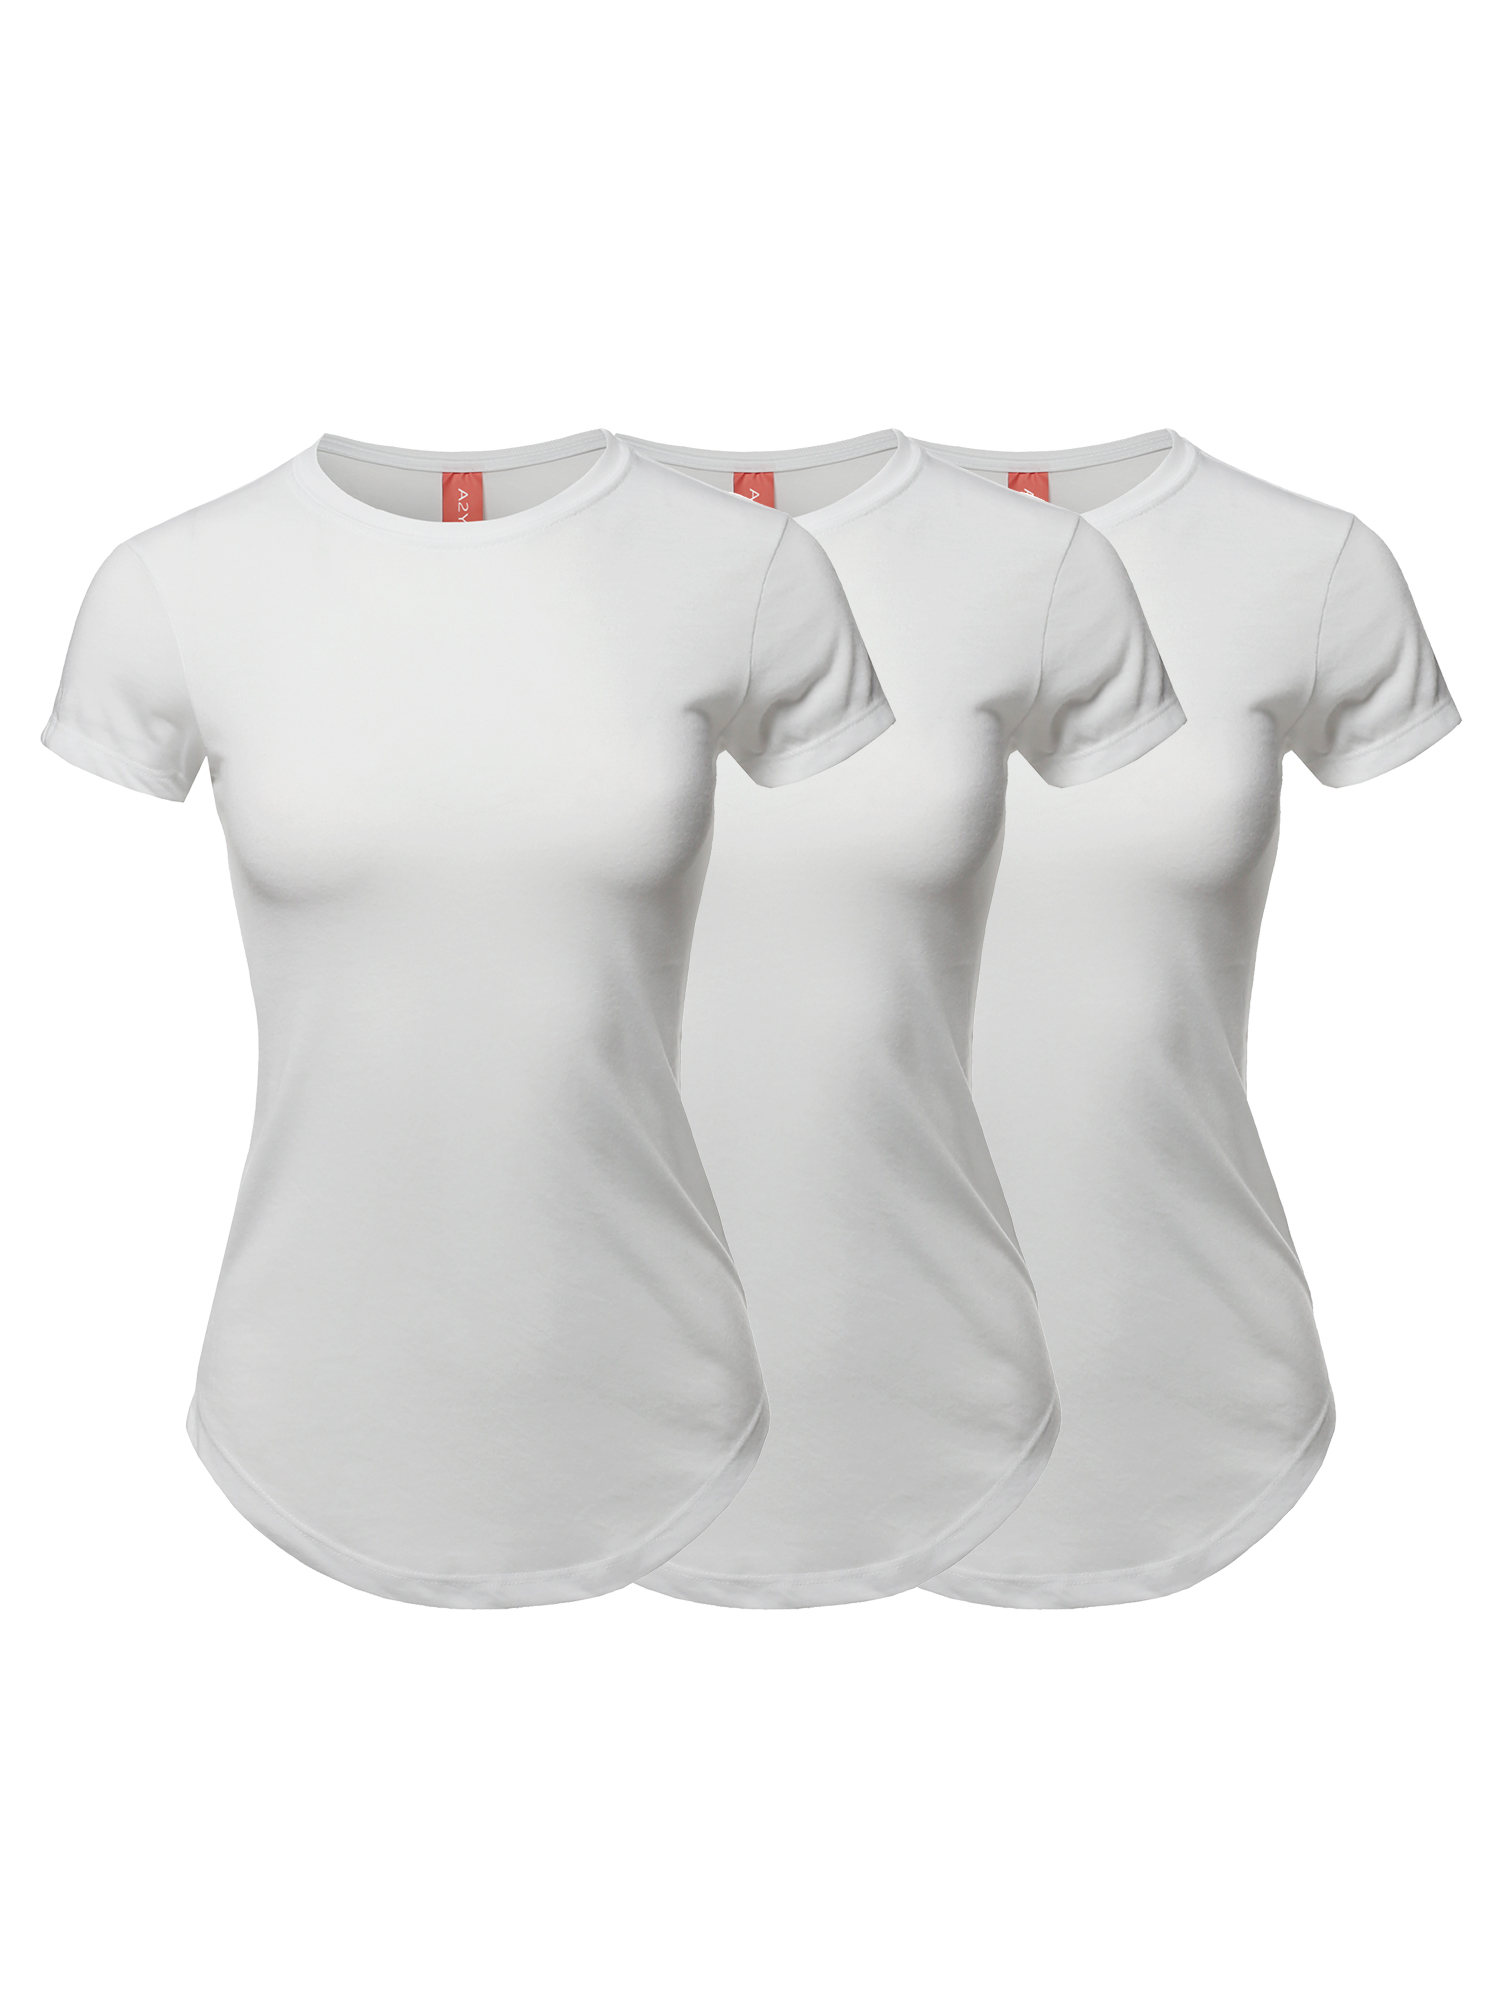 A2Y Women's Basic Solid Premium Short Sleeve Crew Neck Scoop Bottom T Shirt Tee Tops 3-Pack 3 Pack - White S - image 1 of 4